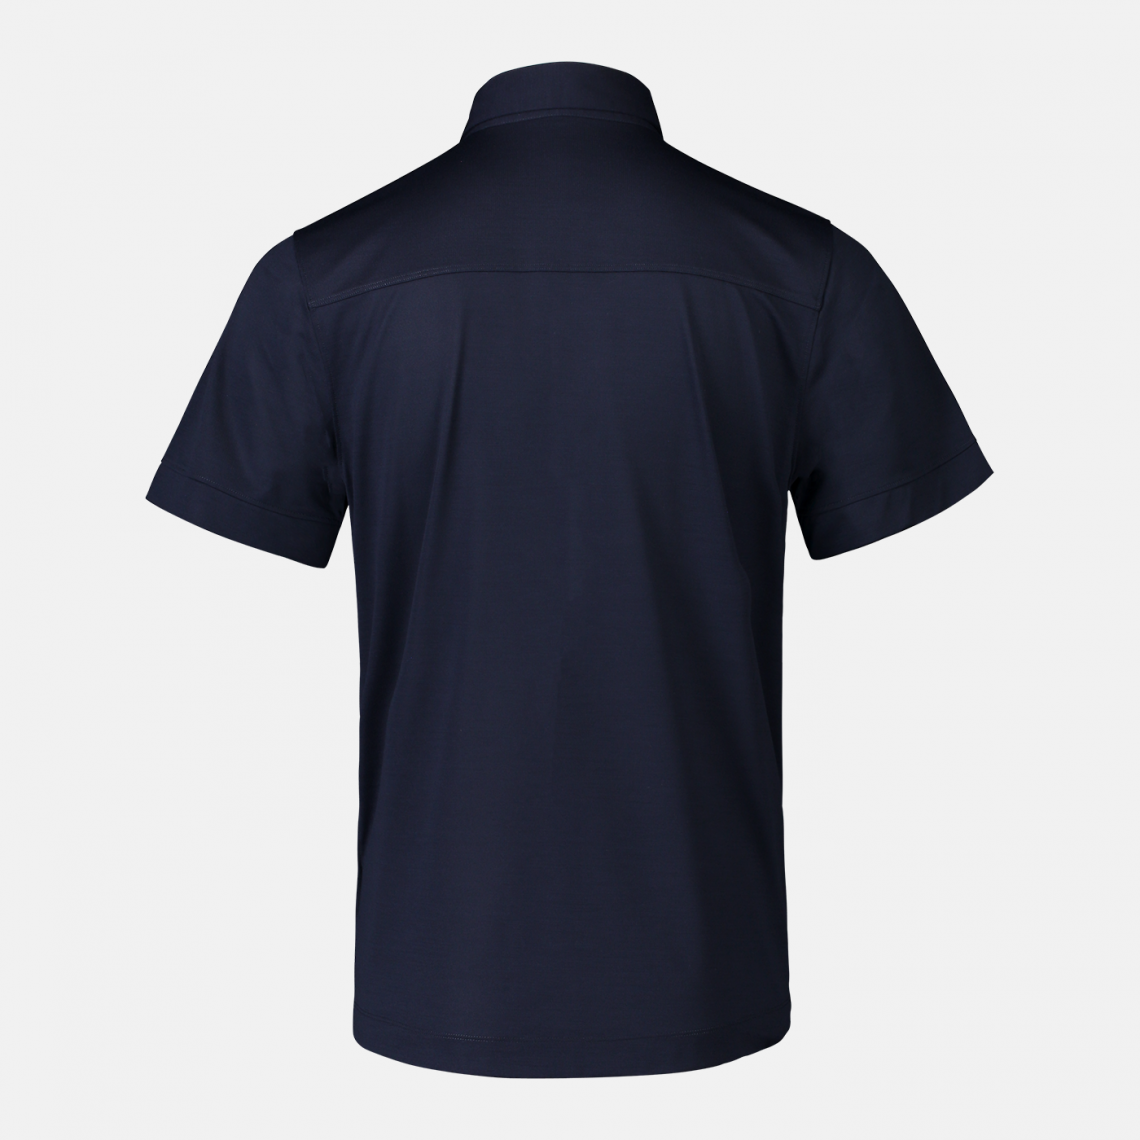 Polo shirt in plant-based material